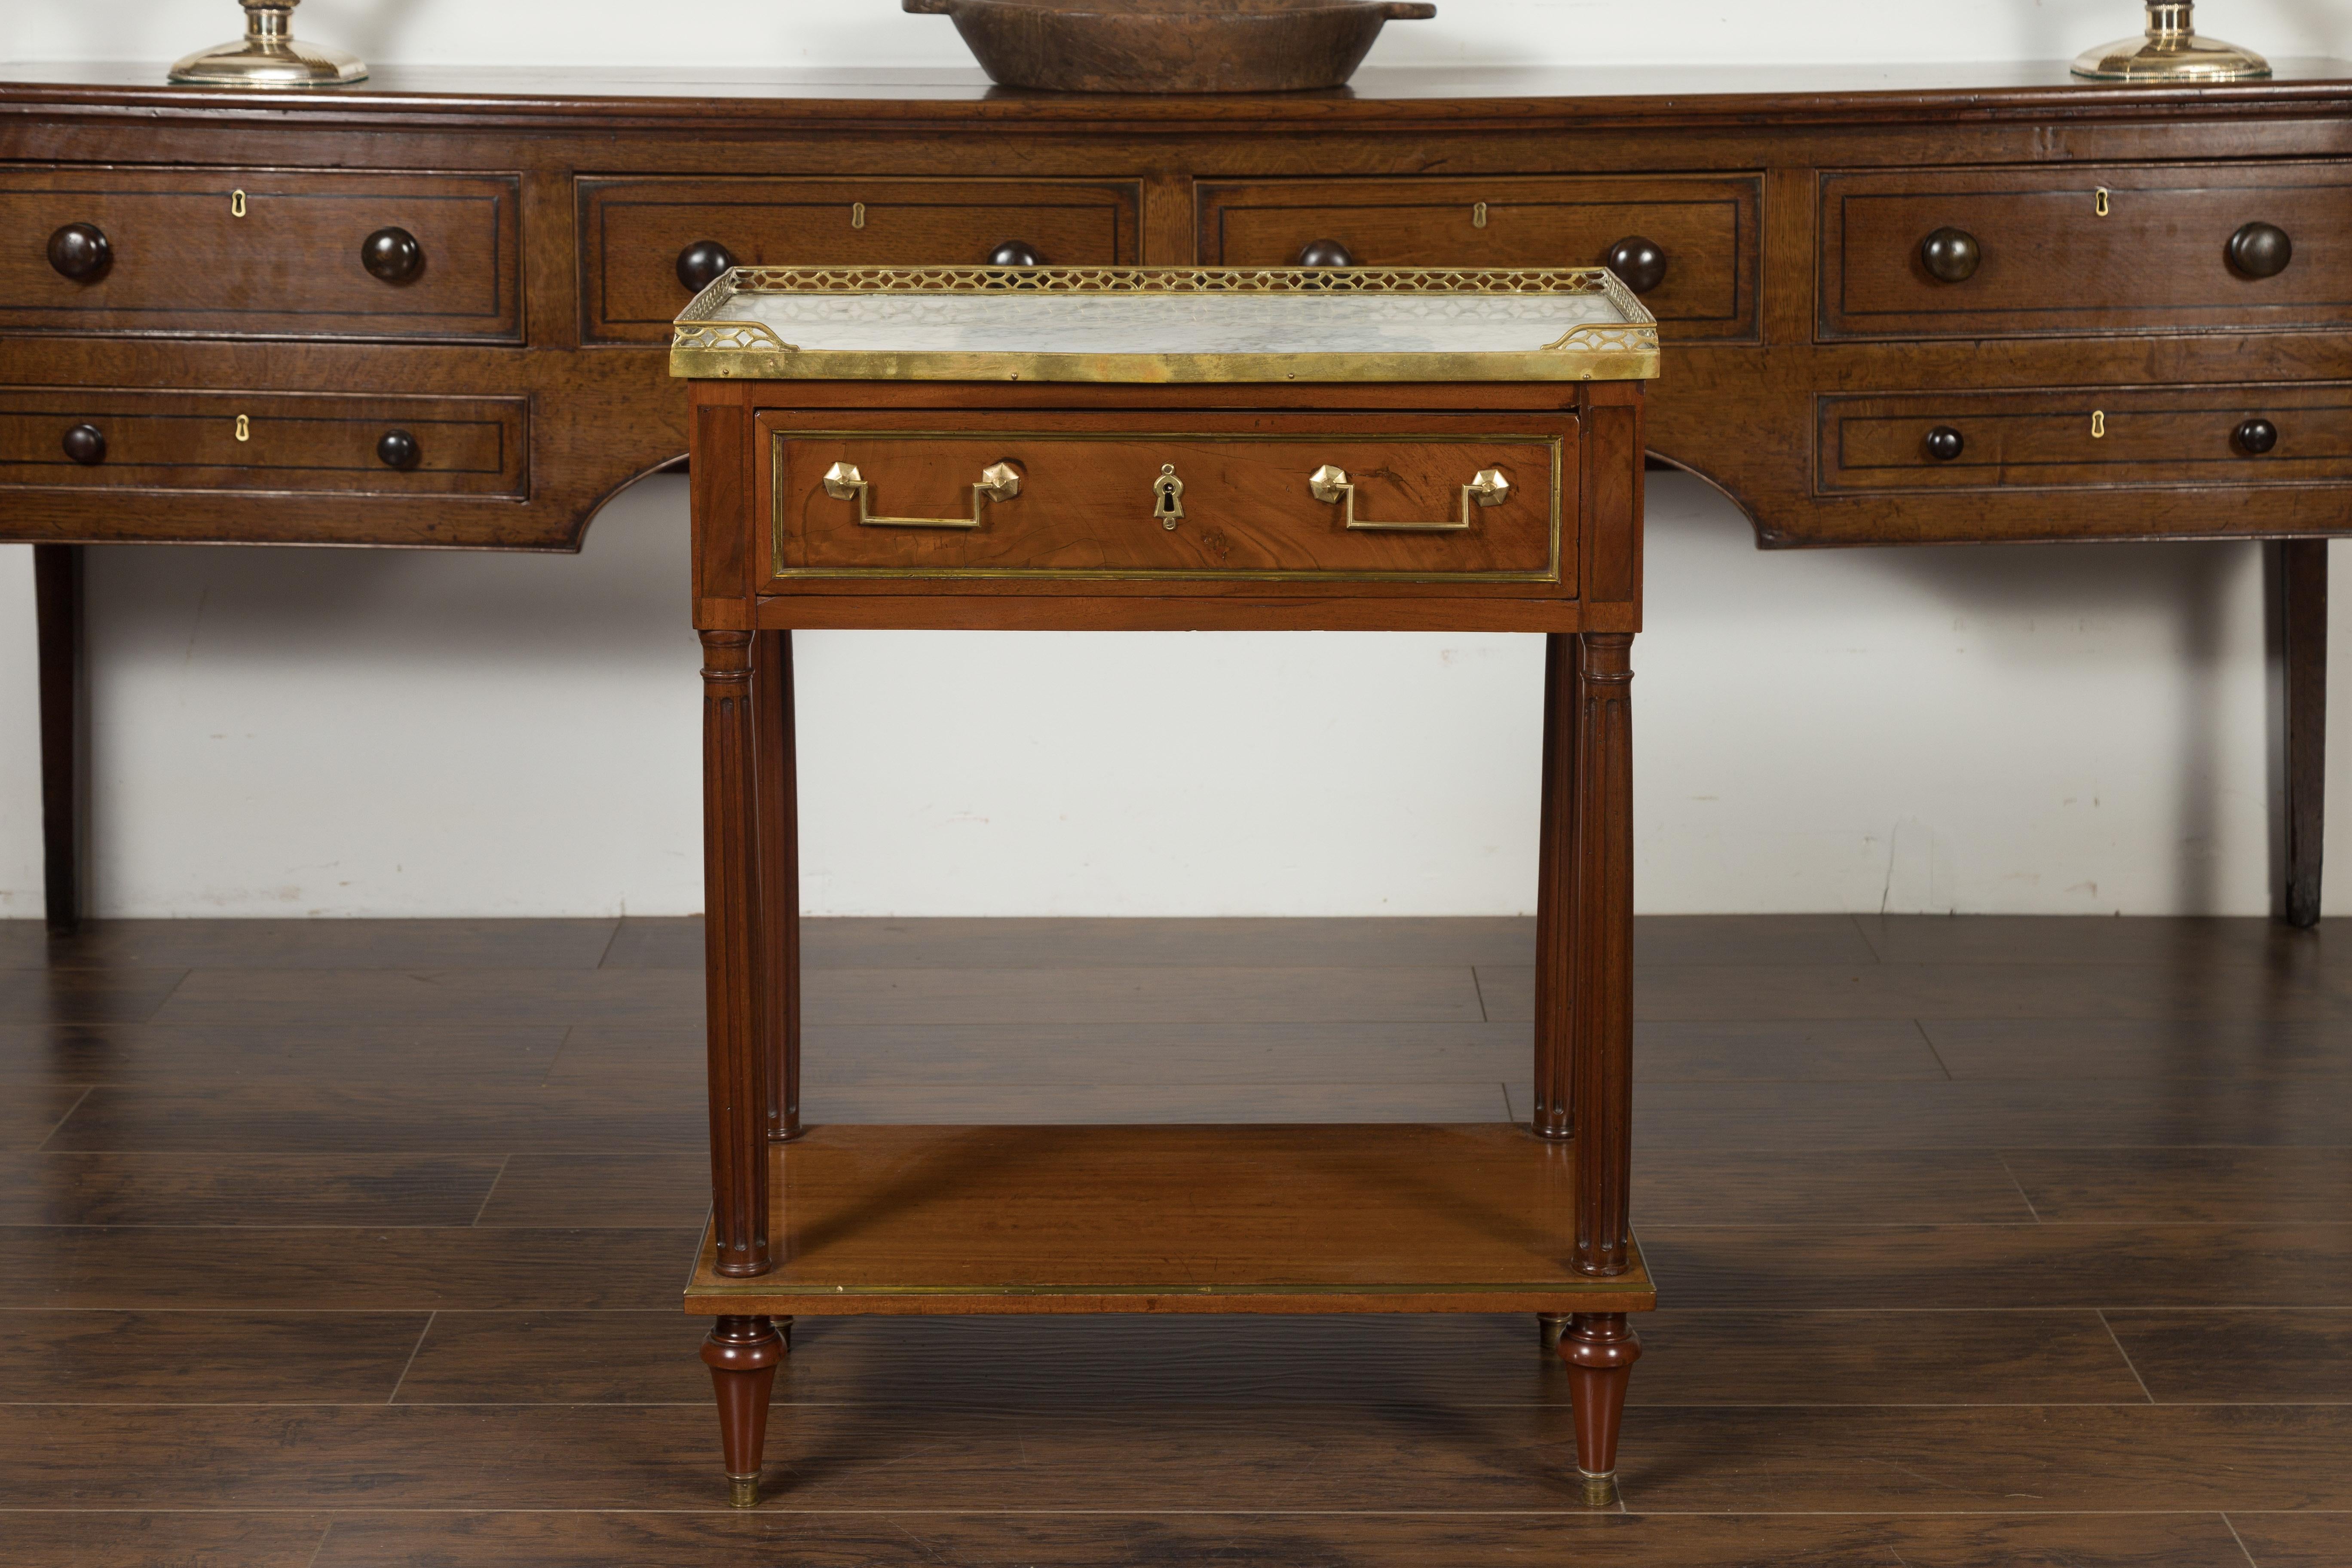 A French Napoleon III period mahogany console table from the mid-19th century, with marble top, brass accents and fluted columns. Born during the reign of France's last emperor Napoleon III, this console table features a white veined marble top